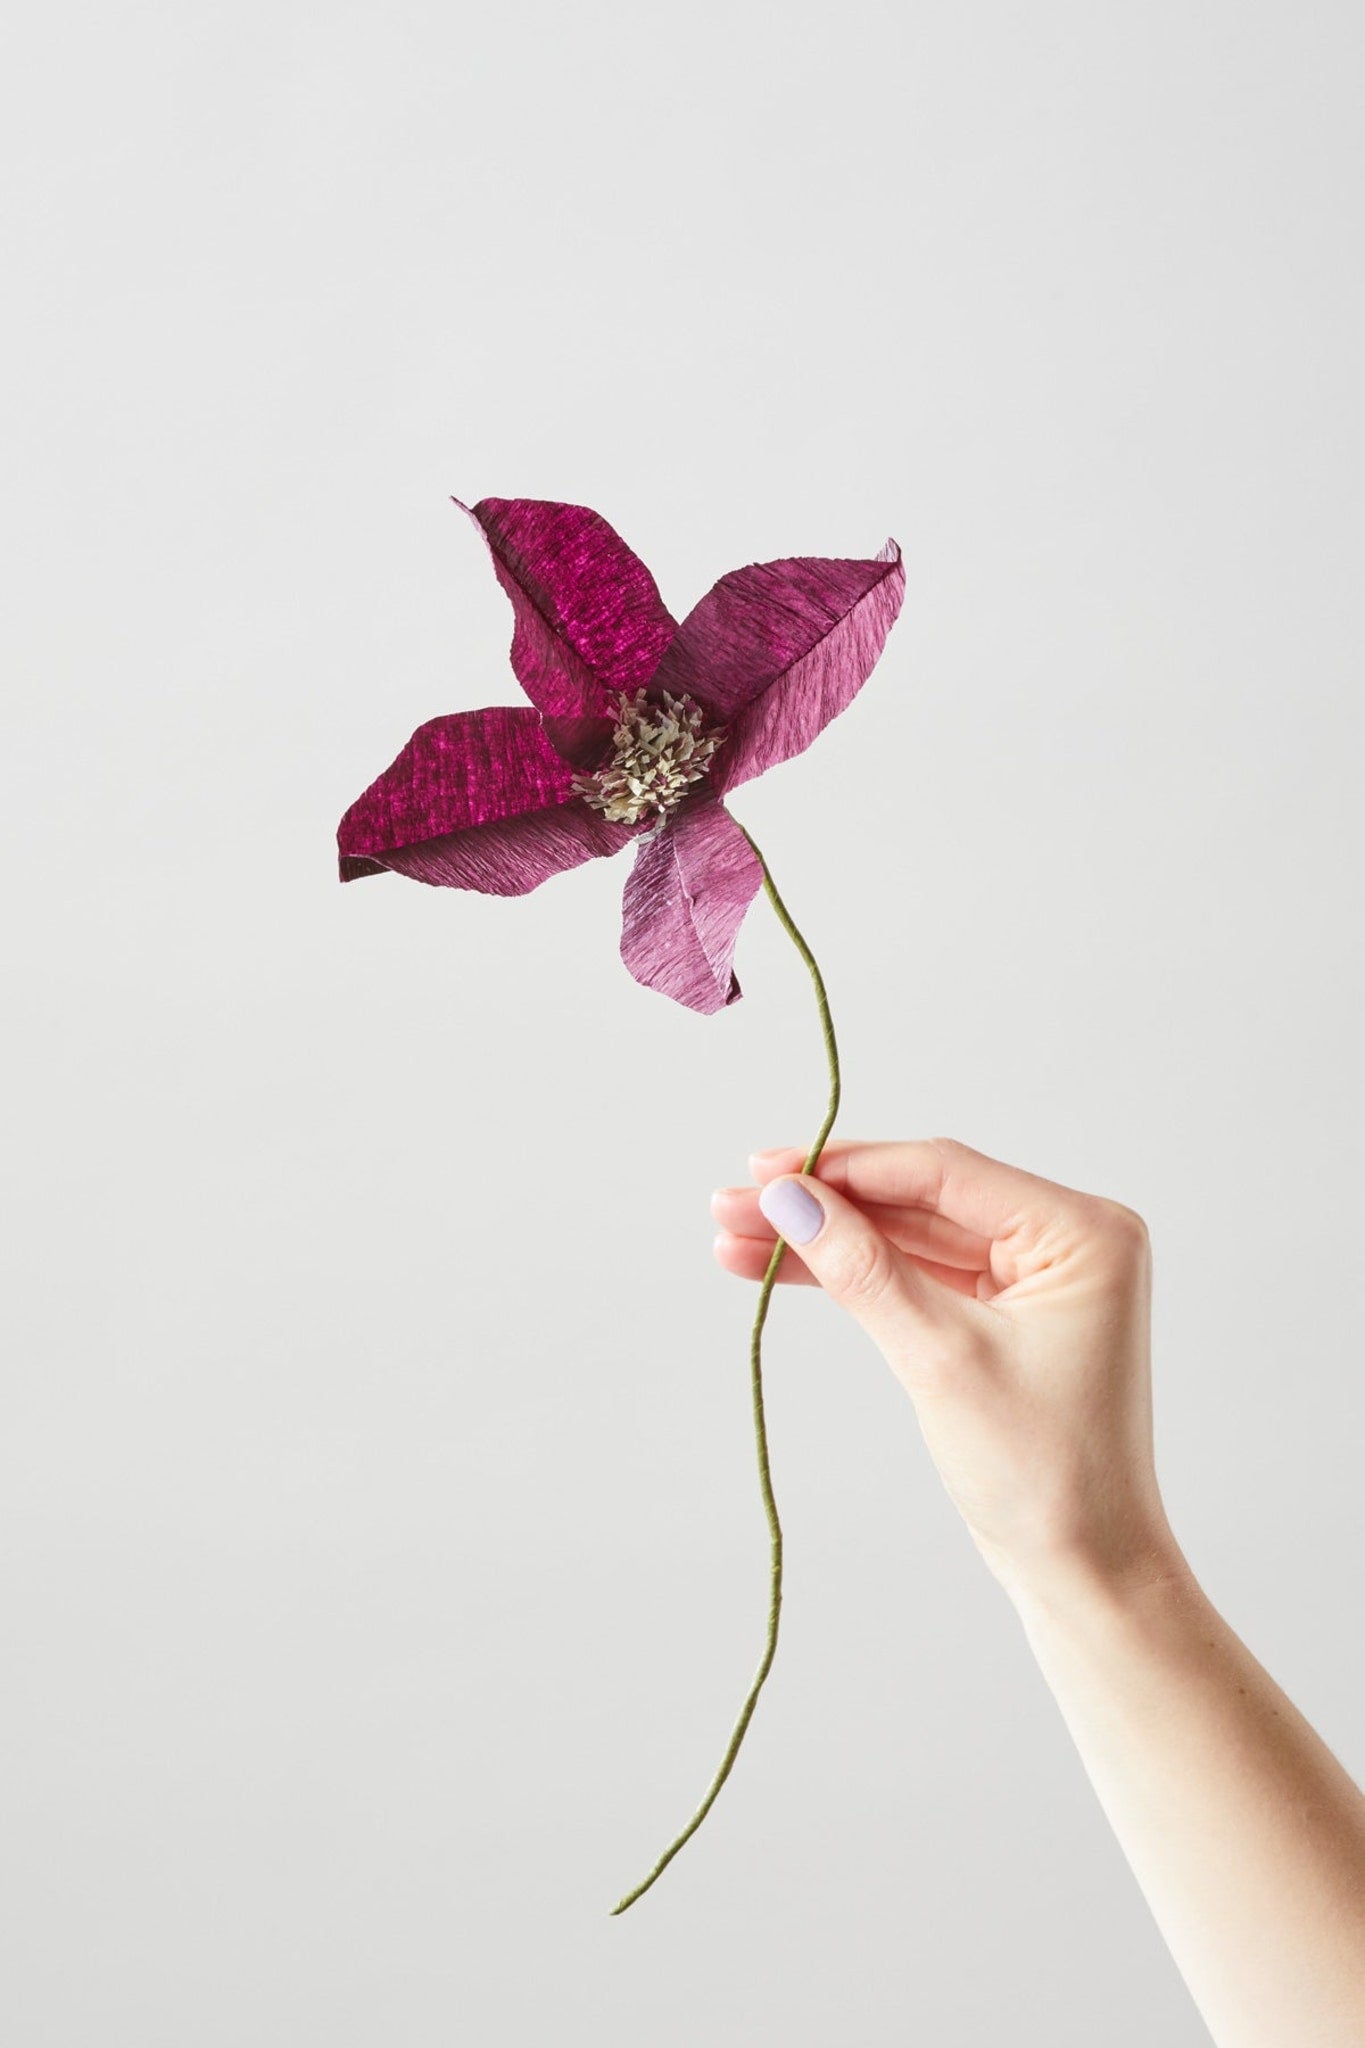 Helia Paper Flowers on LinkedIn: Paper Flowers 💫 l have been adding  beautifully peculiar paper flowers to…